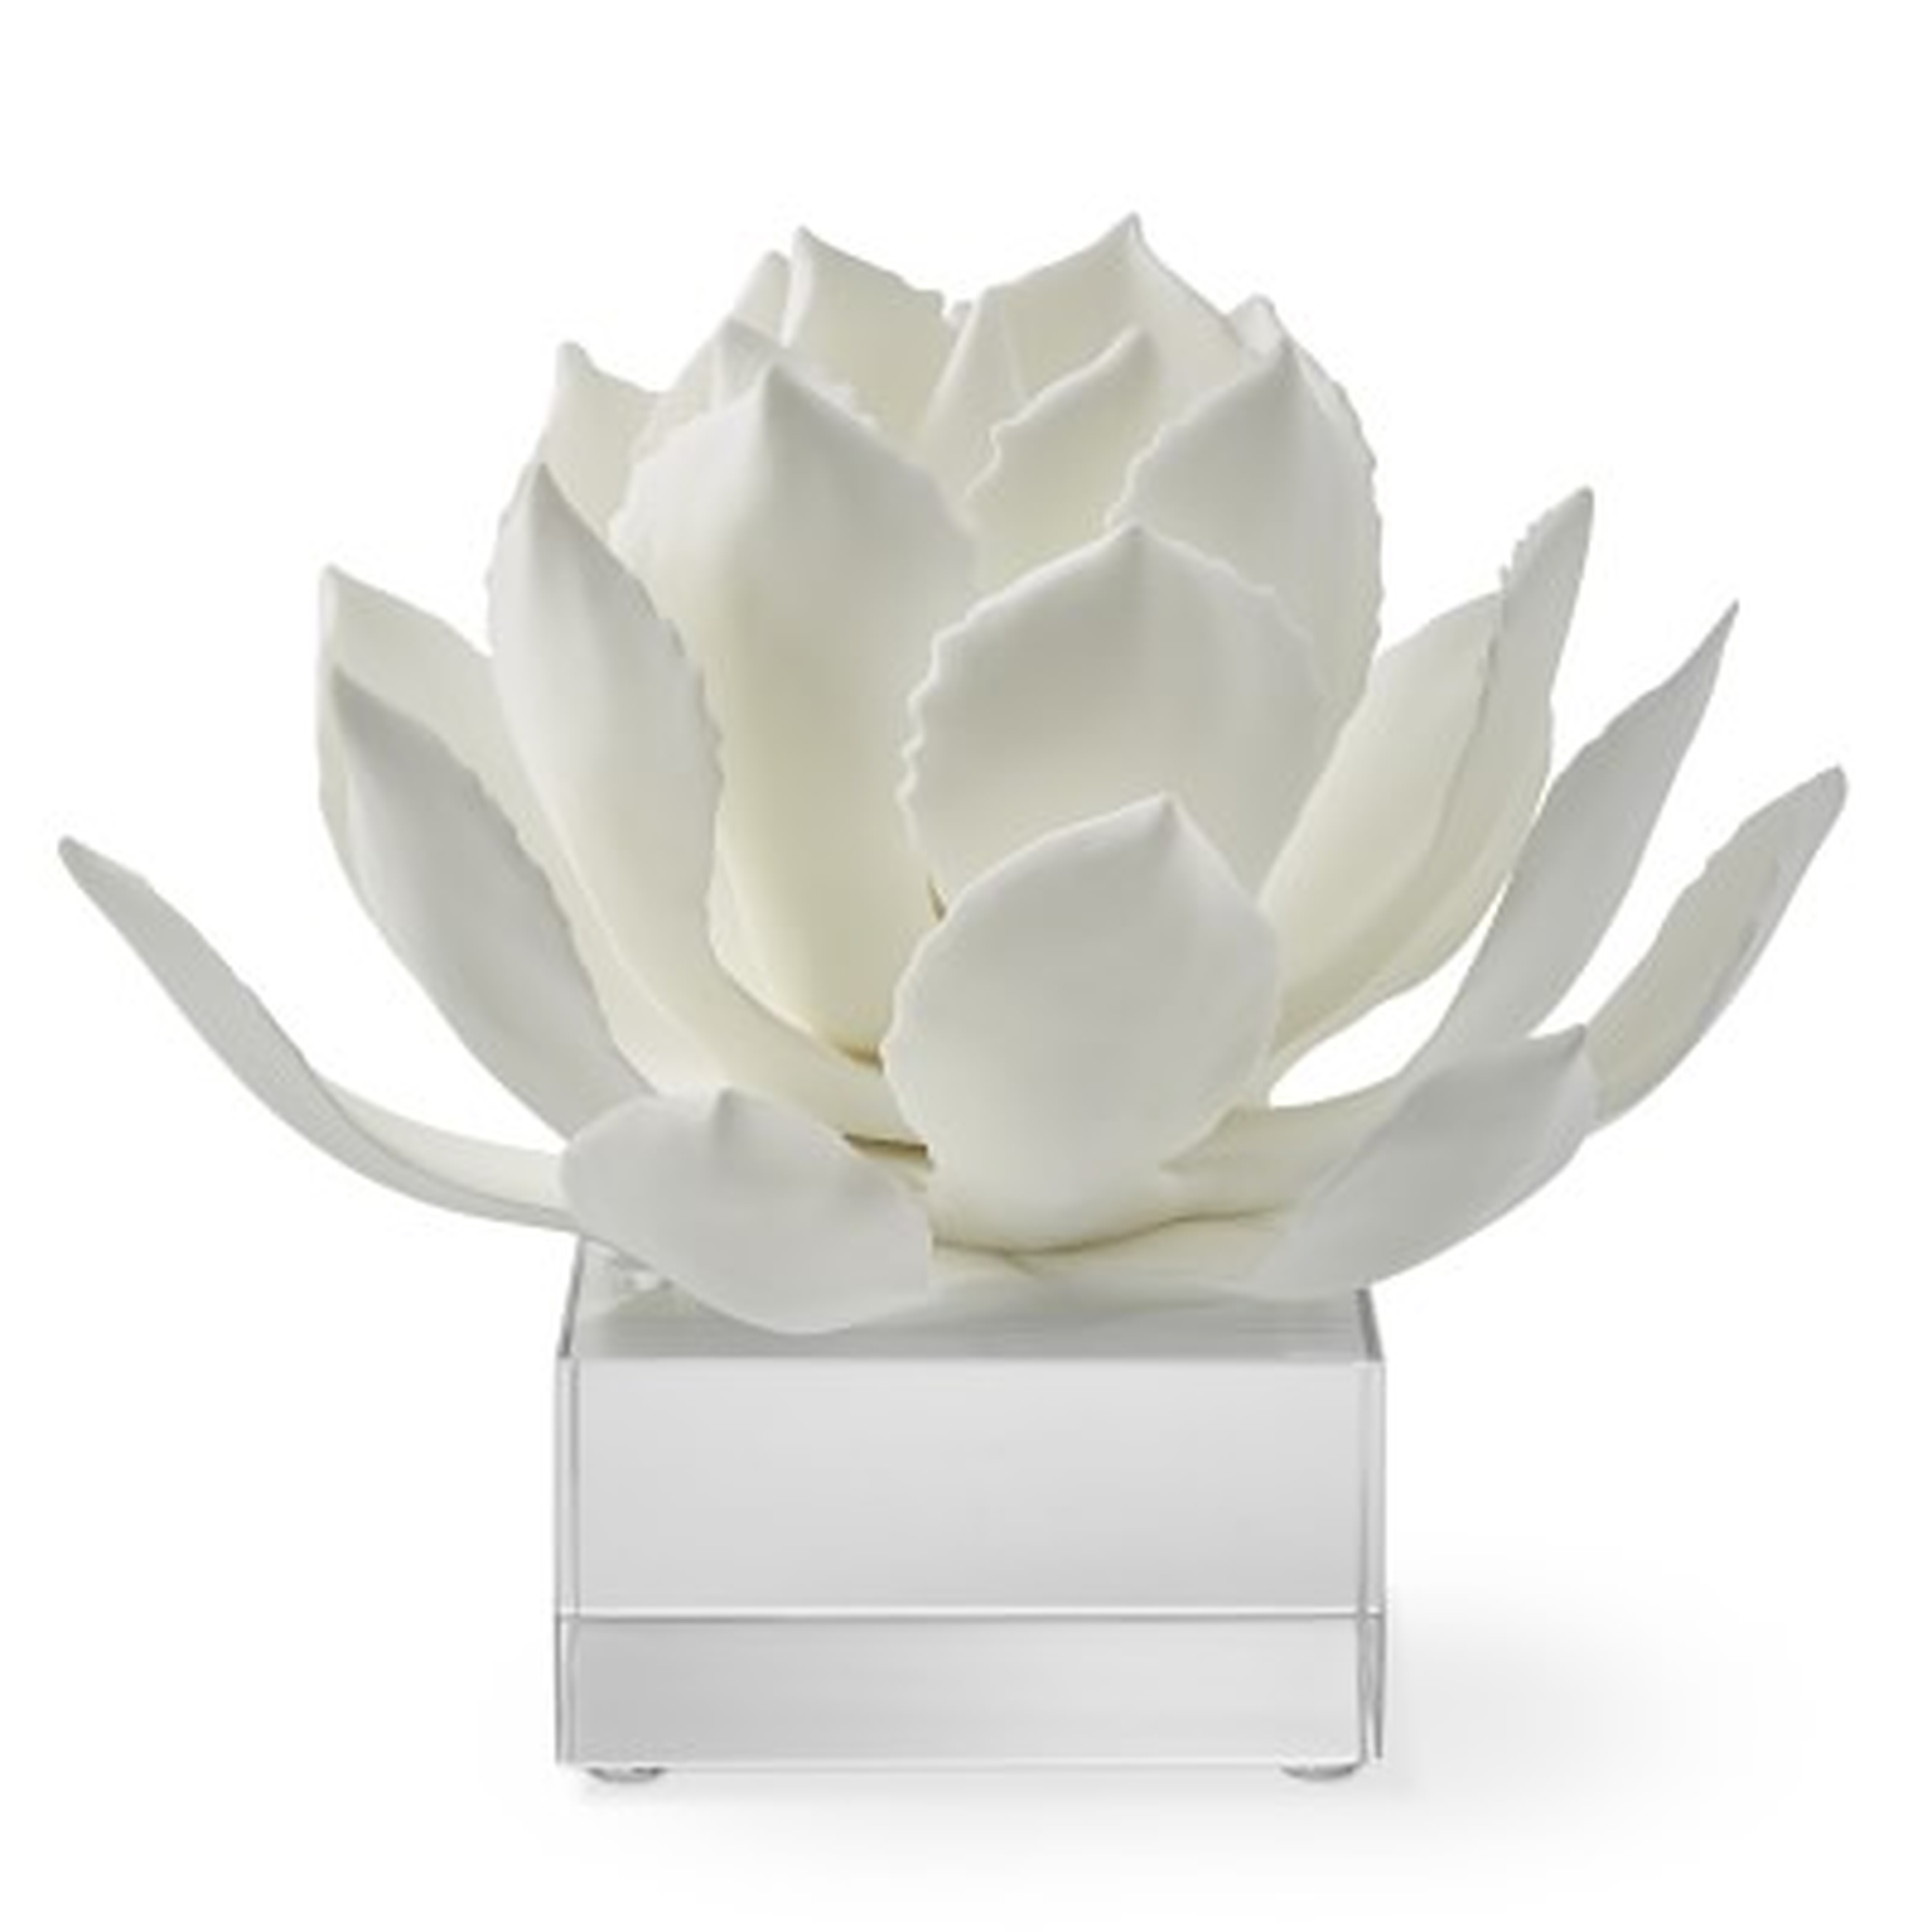 White Agave On Acrylic Stand, Large - Williams Sonoma